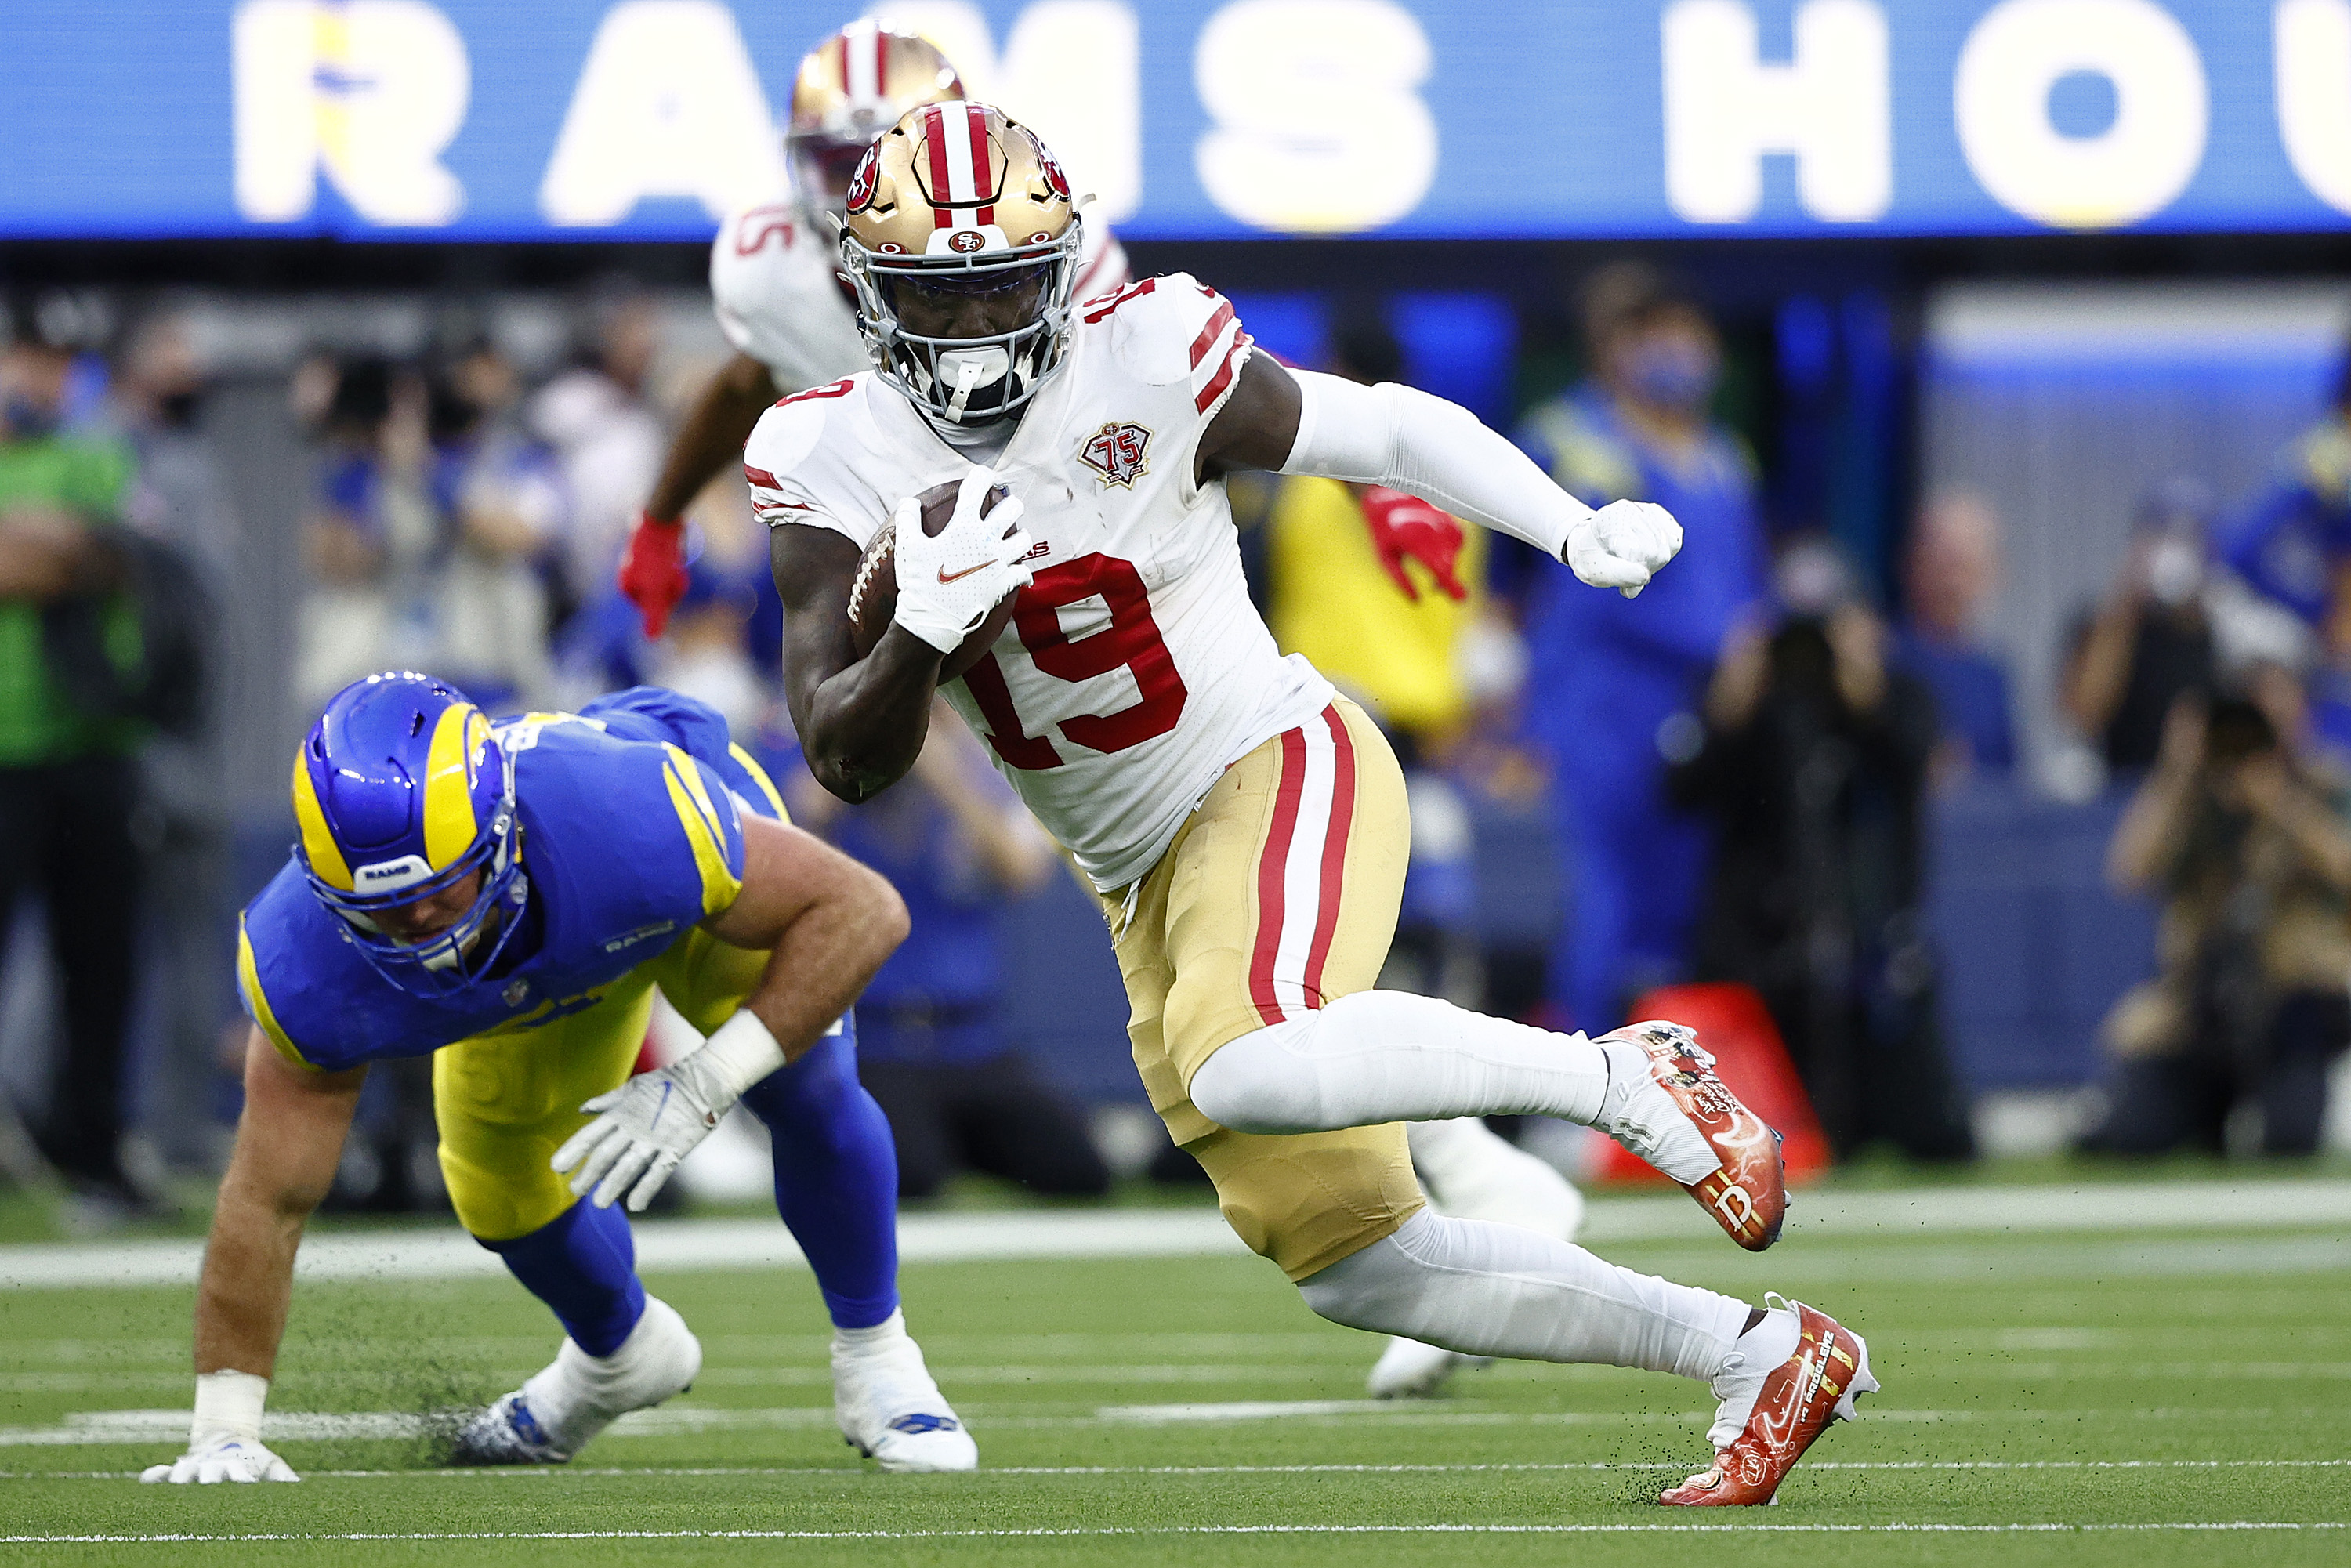 49ers All-Pro WR Deebo Samuel requests trade, report says - The Boston Globe